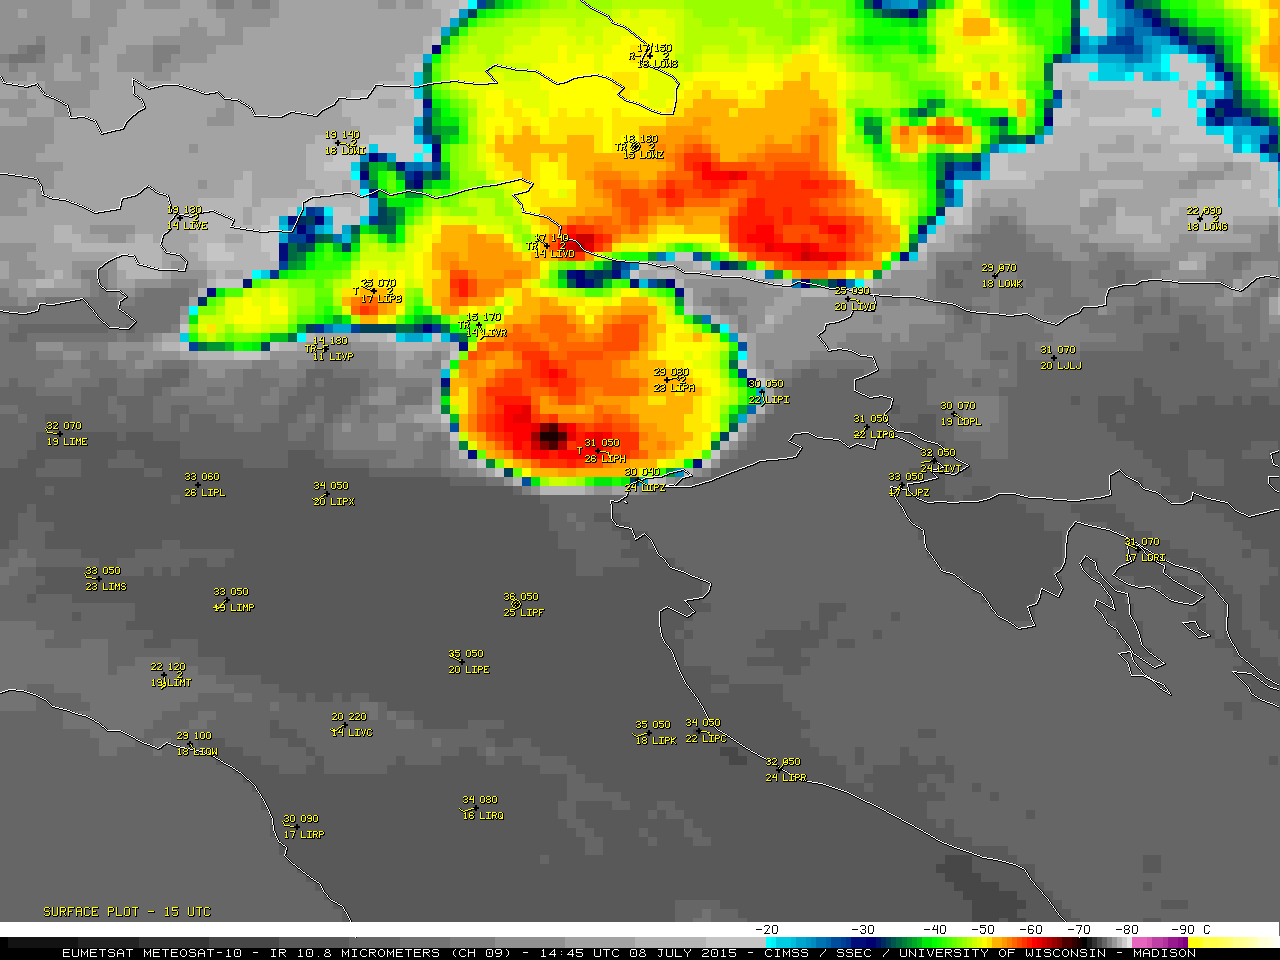 Meteosat-10 Infrared (10.8 µm) images (click to play animation)